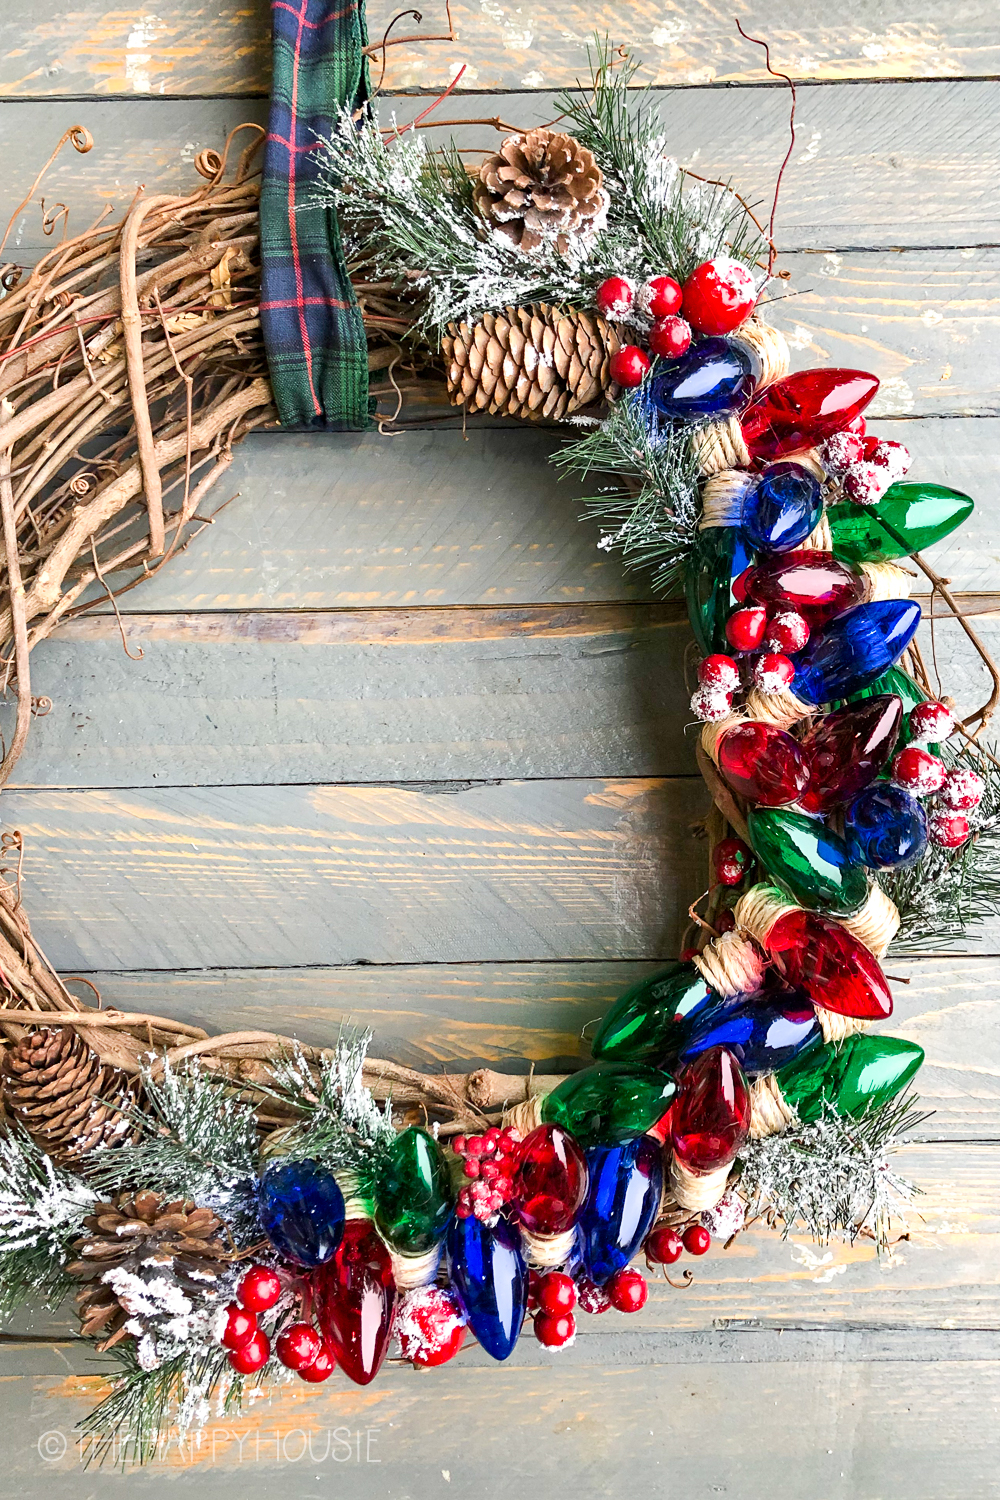 Holiday colours of red, green and blue on the wreath.